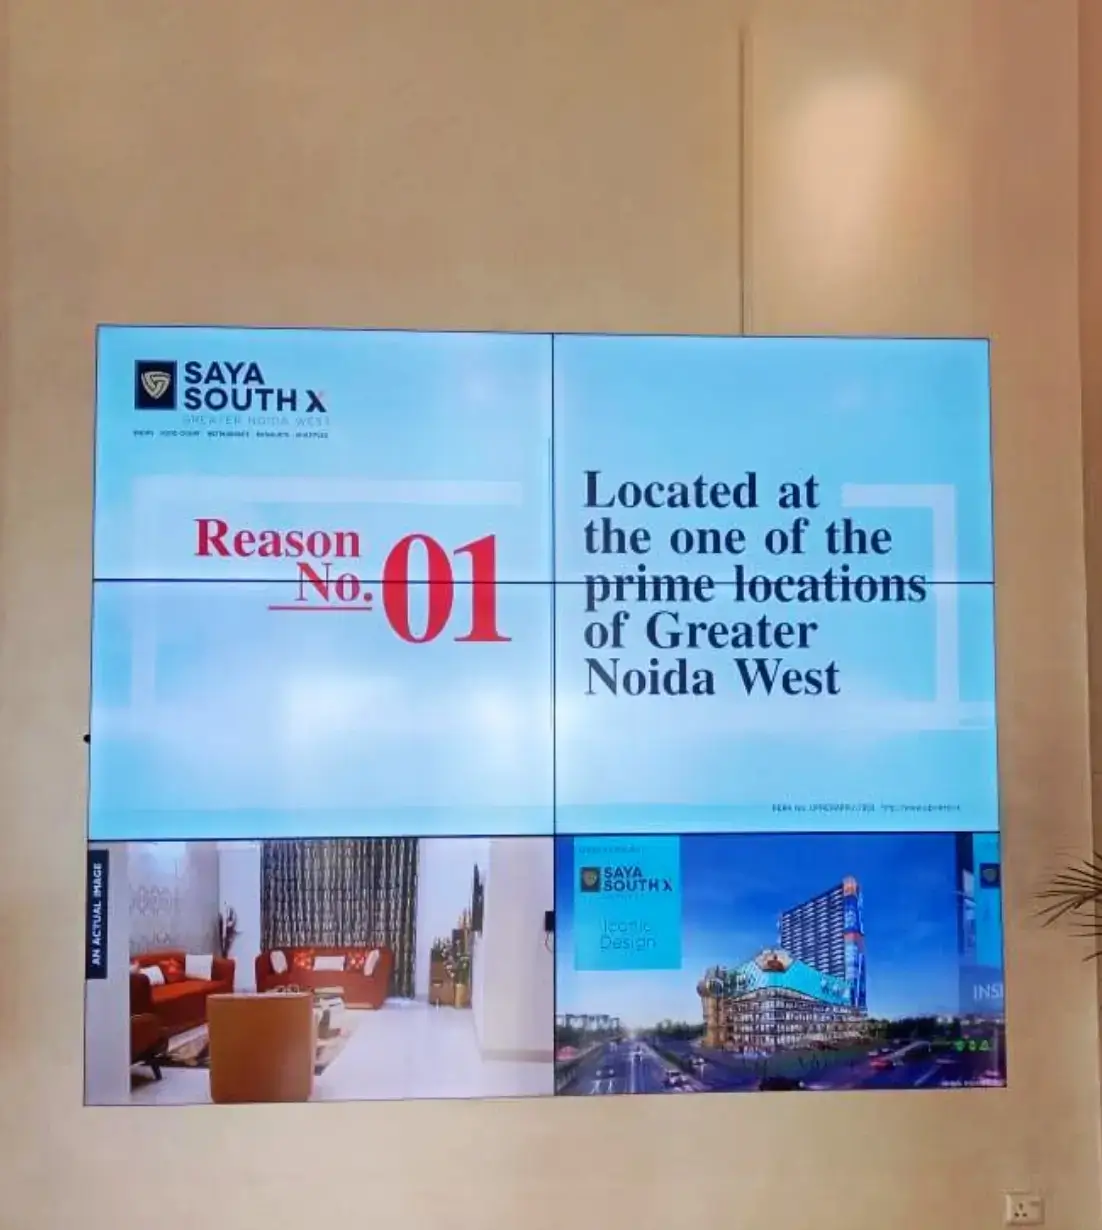 Digital signage content playing on a display at SAYA real estate office lobby which is powered by Pickcel